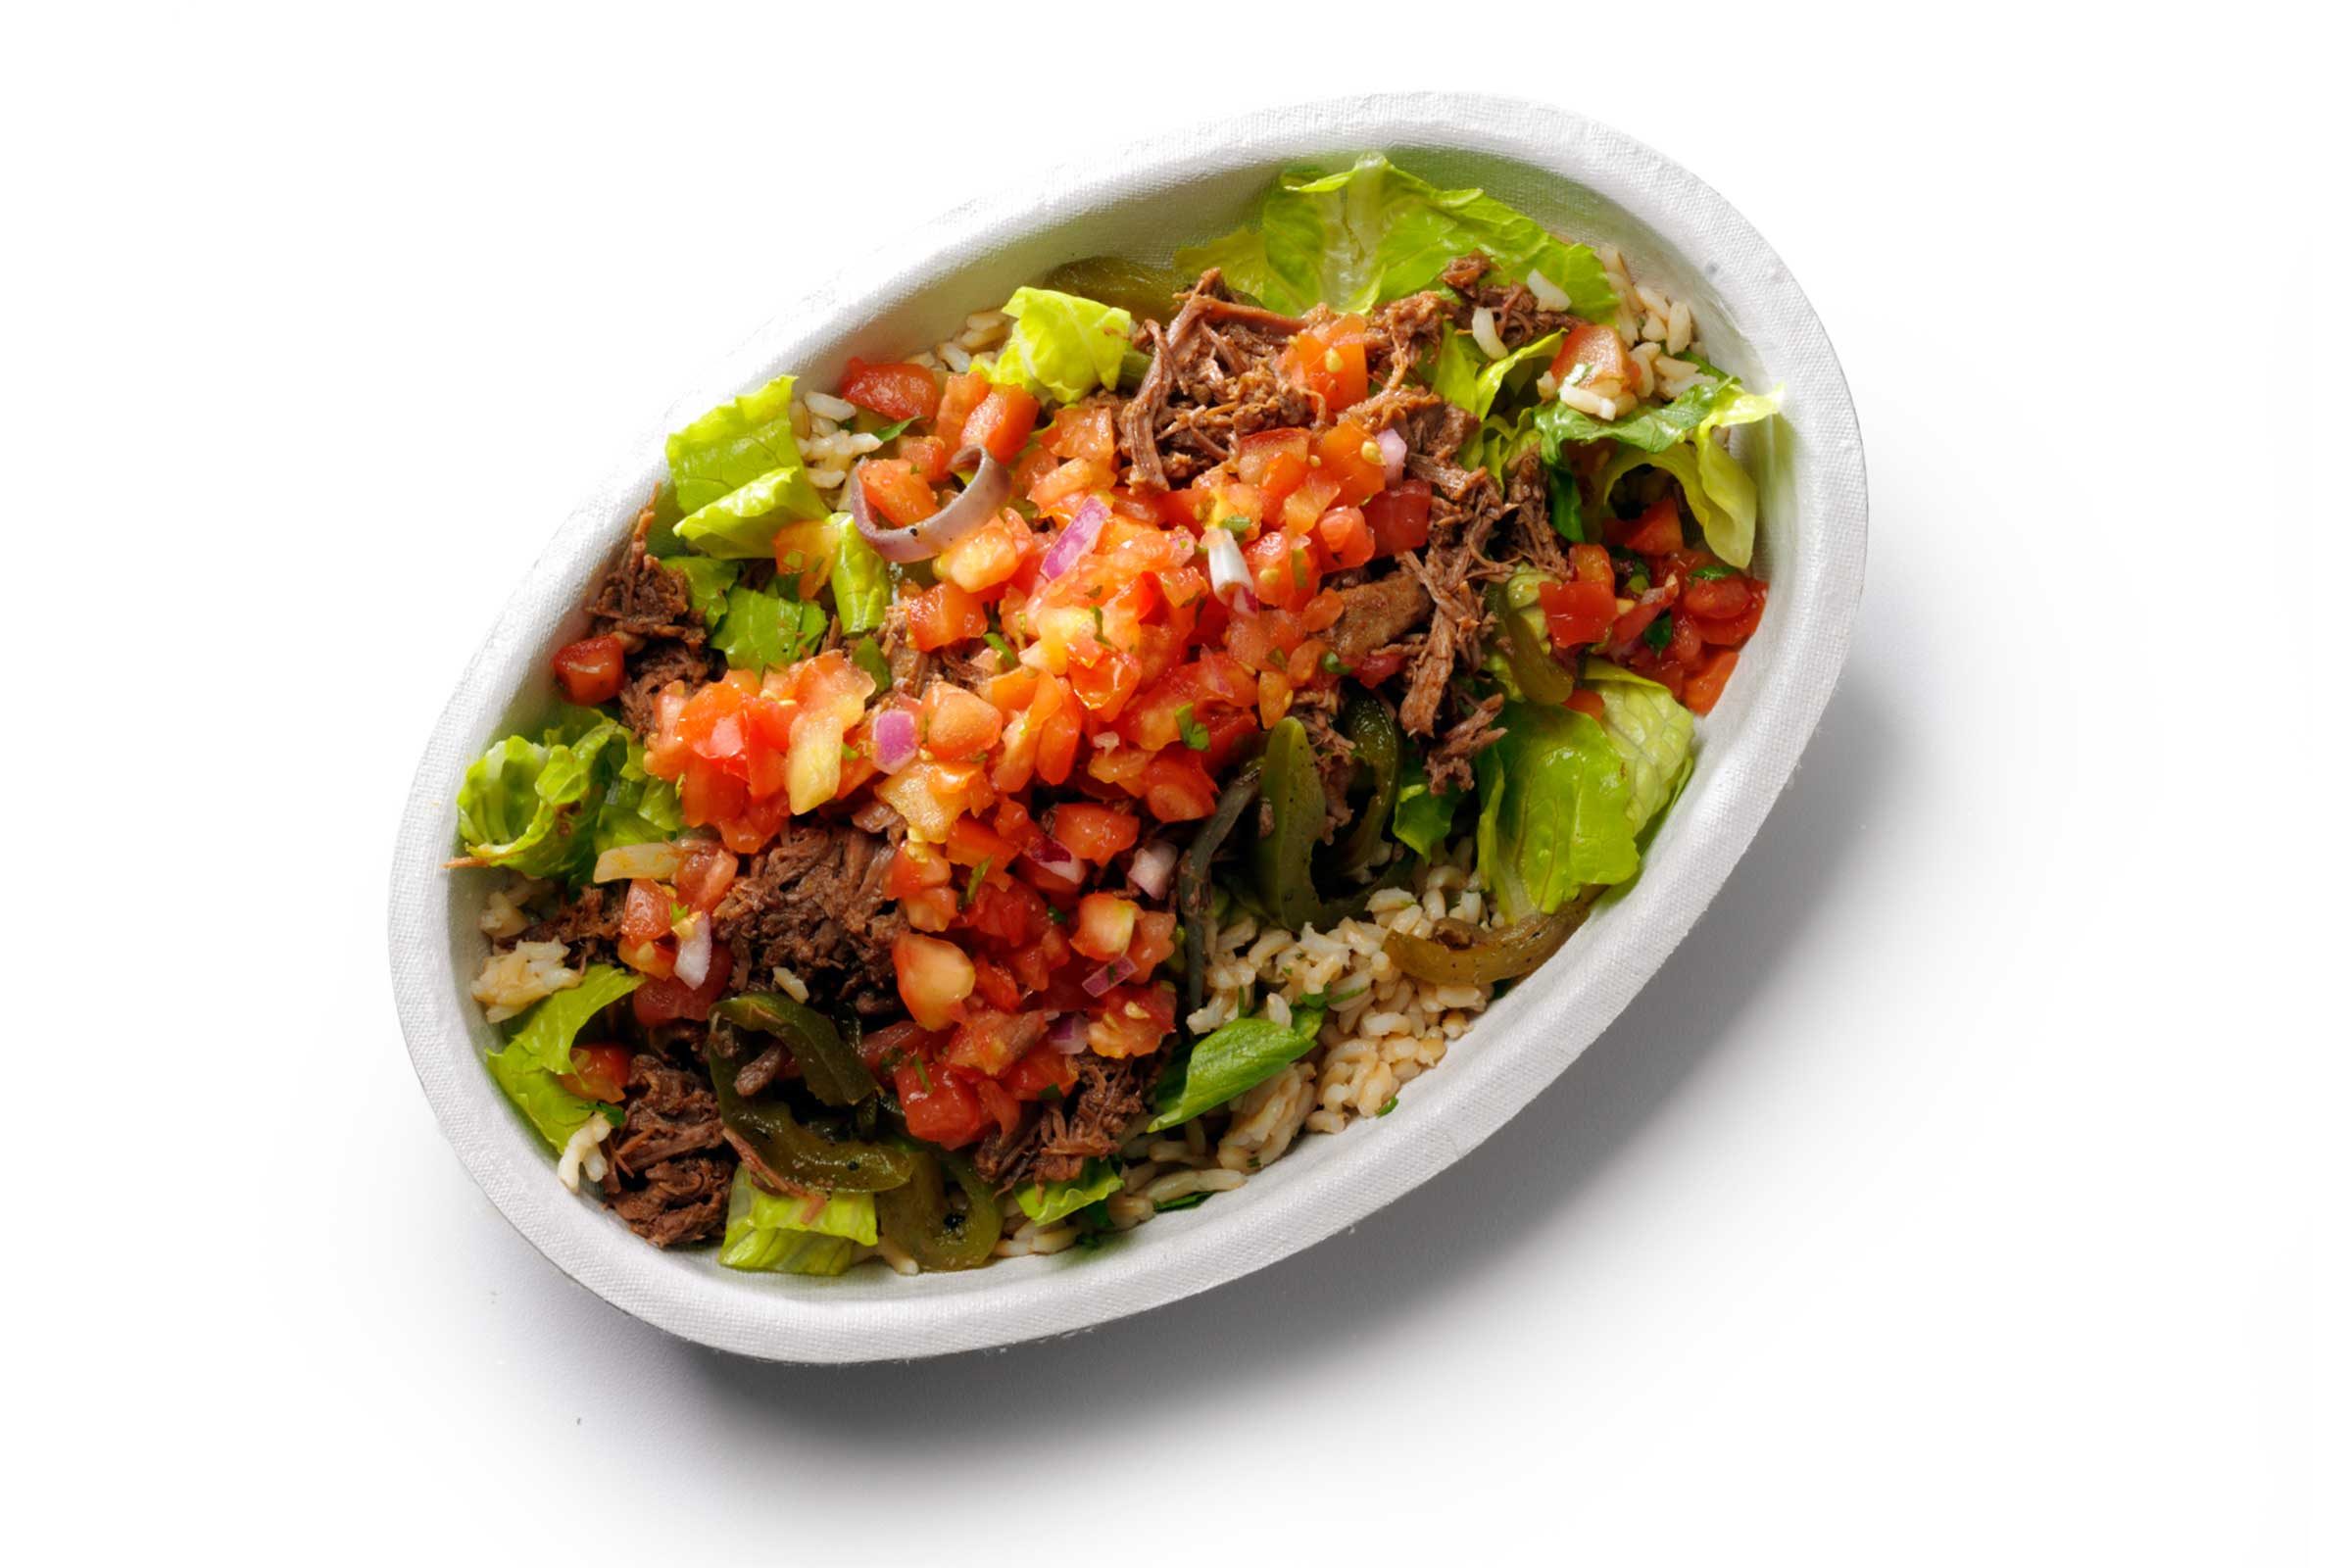 Healthier Choices at Chain Restaurants: 25 Low-Cal Options for Losing Weight